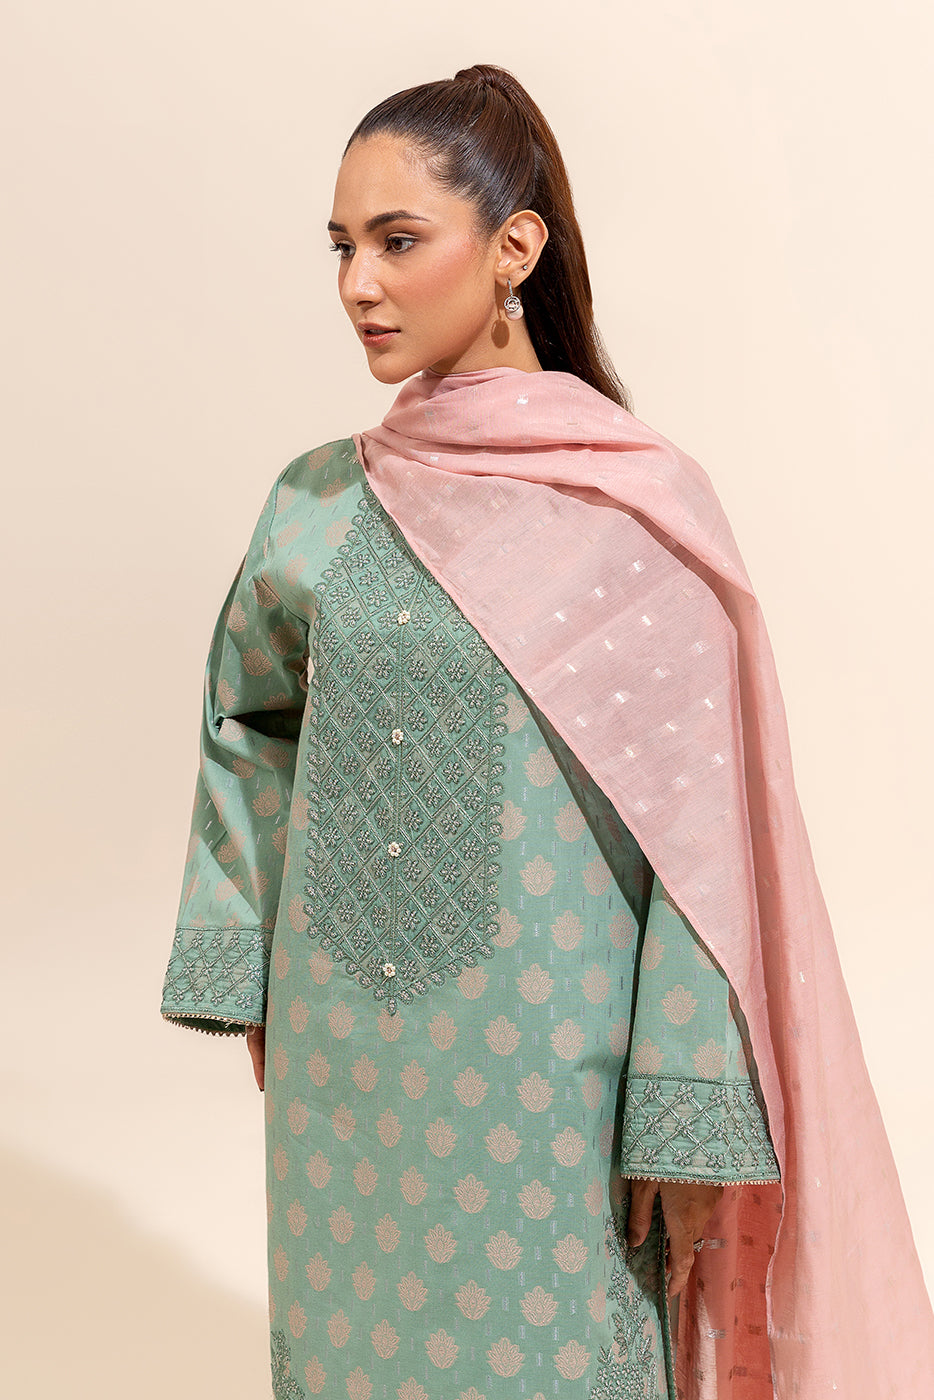 3 PIECE EMBROIDERED JACQUARD SUIT-TURQOISE BLUSH (UNSTITCHED)